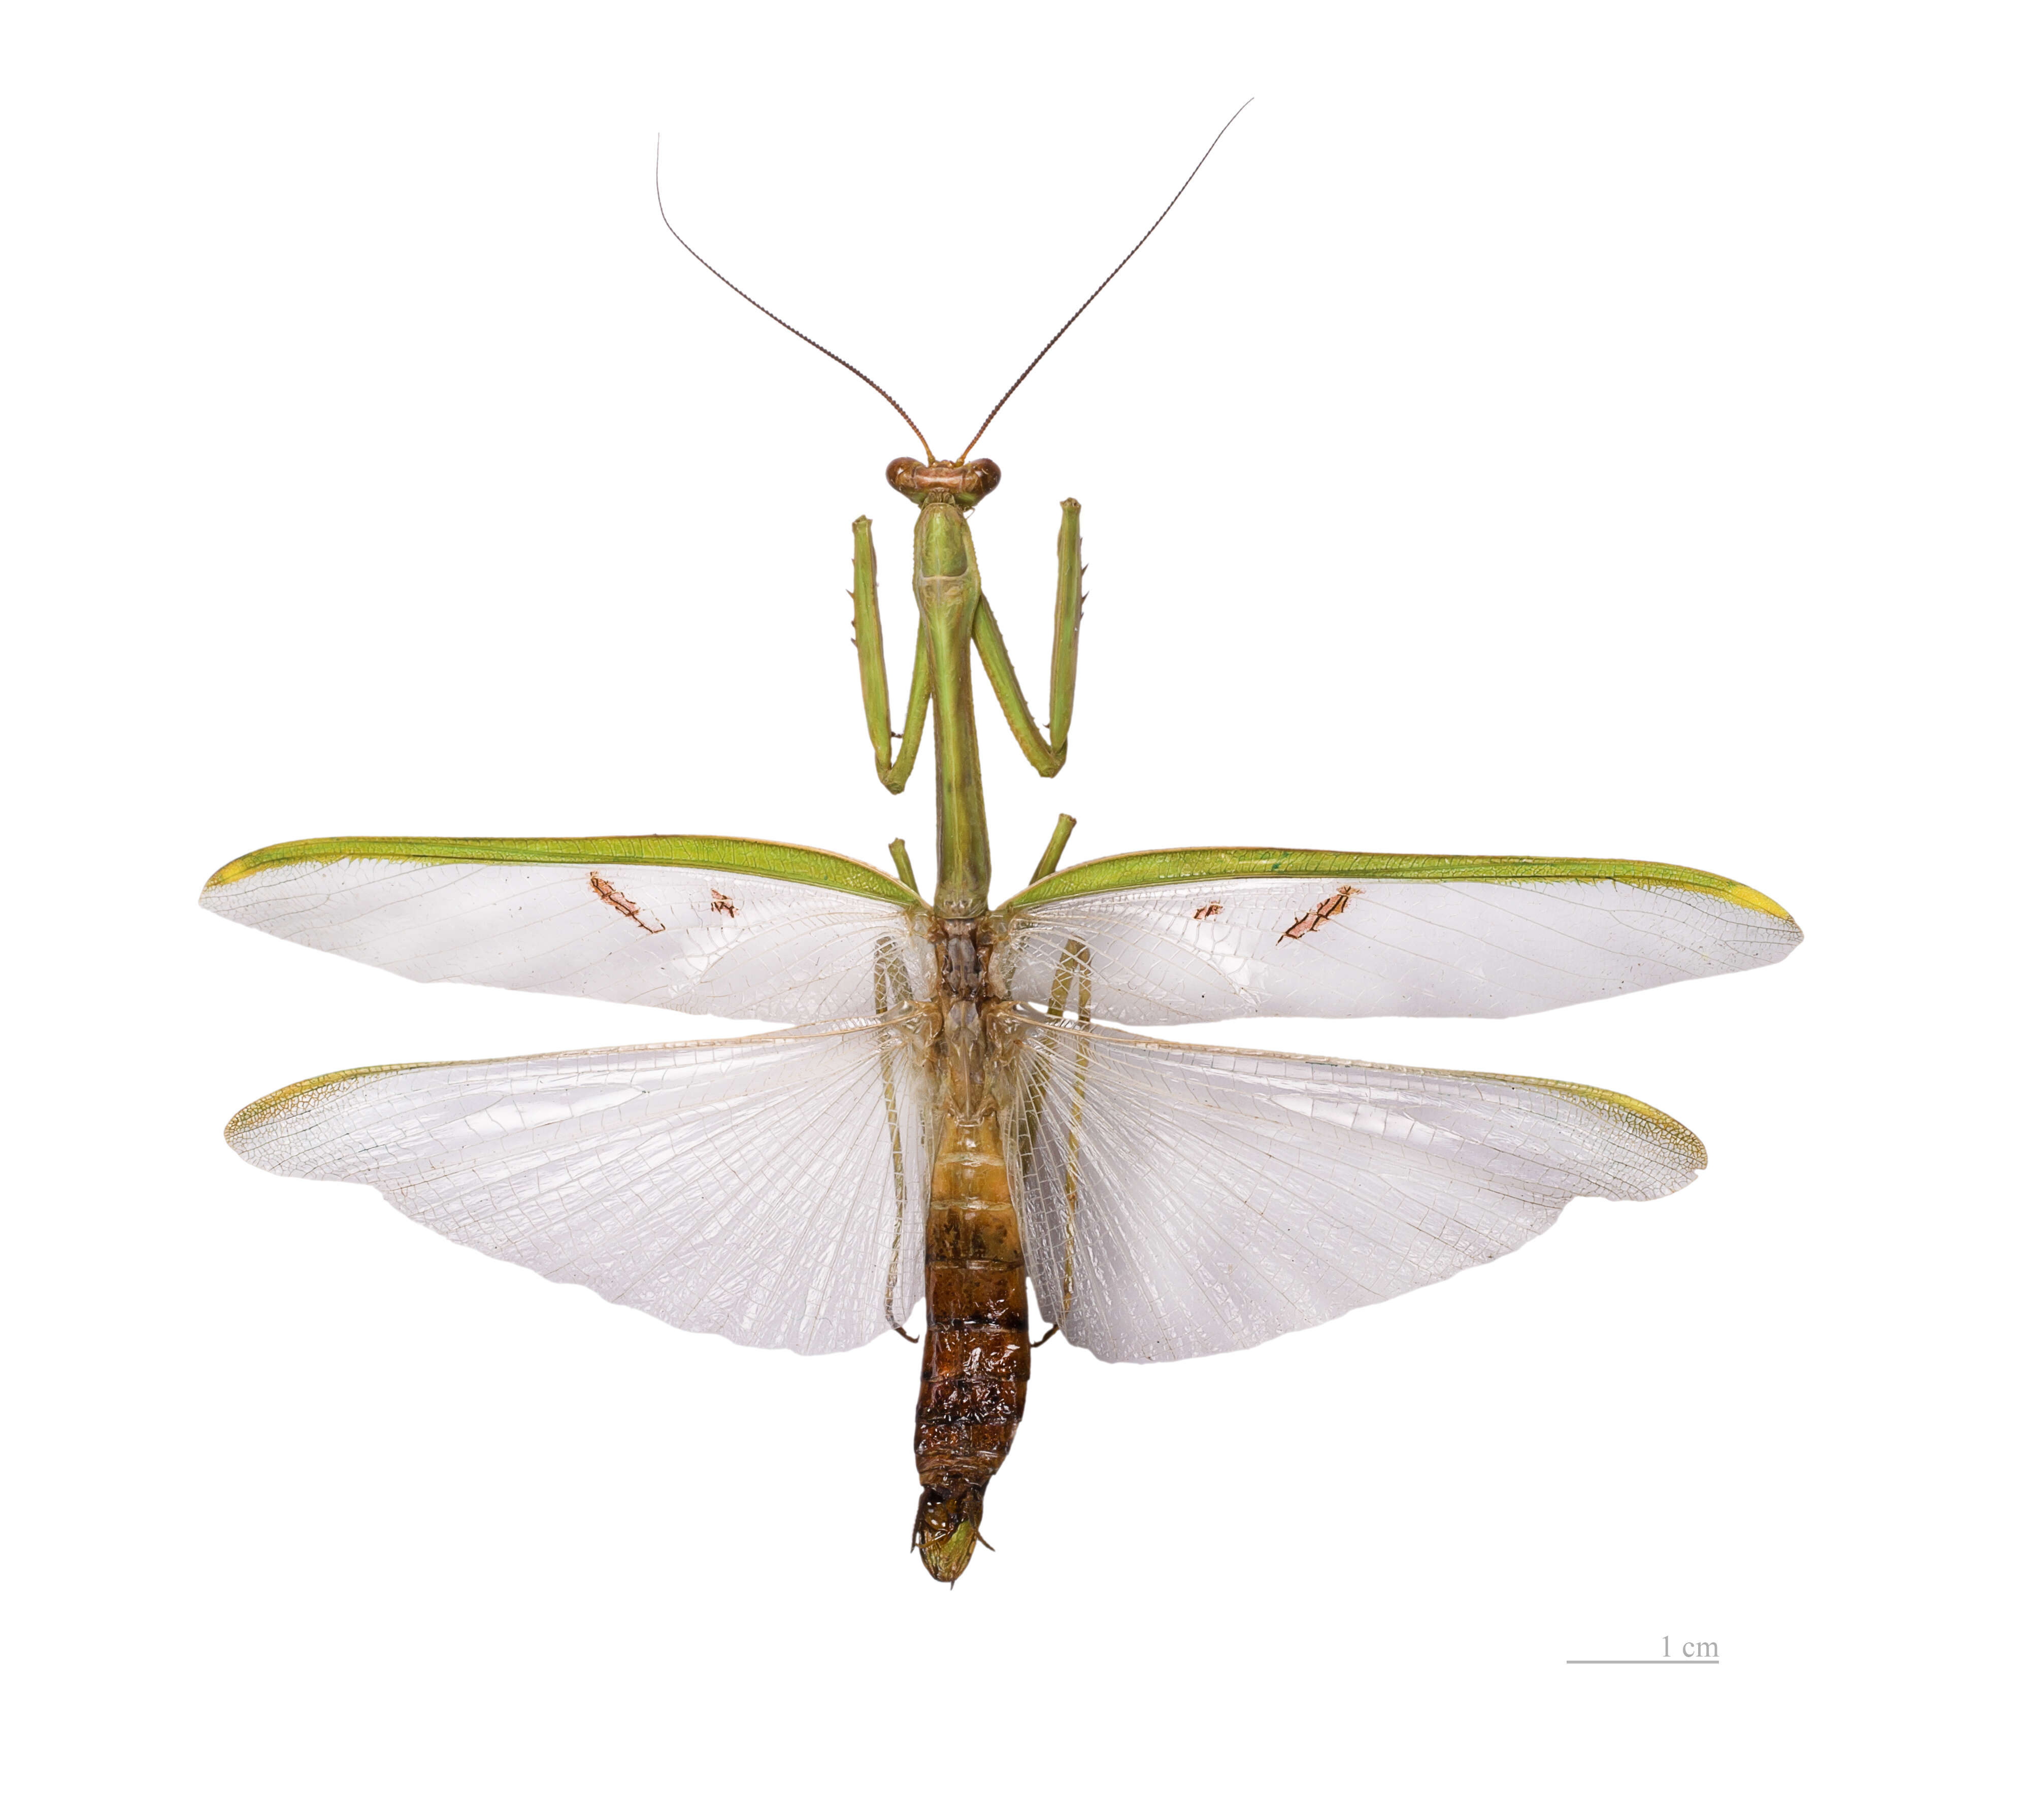 Image of Stagmatoptera flavipennis